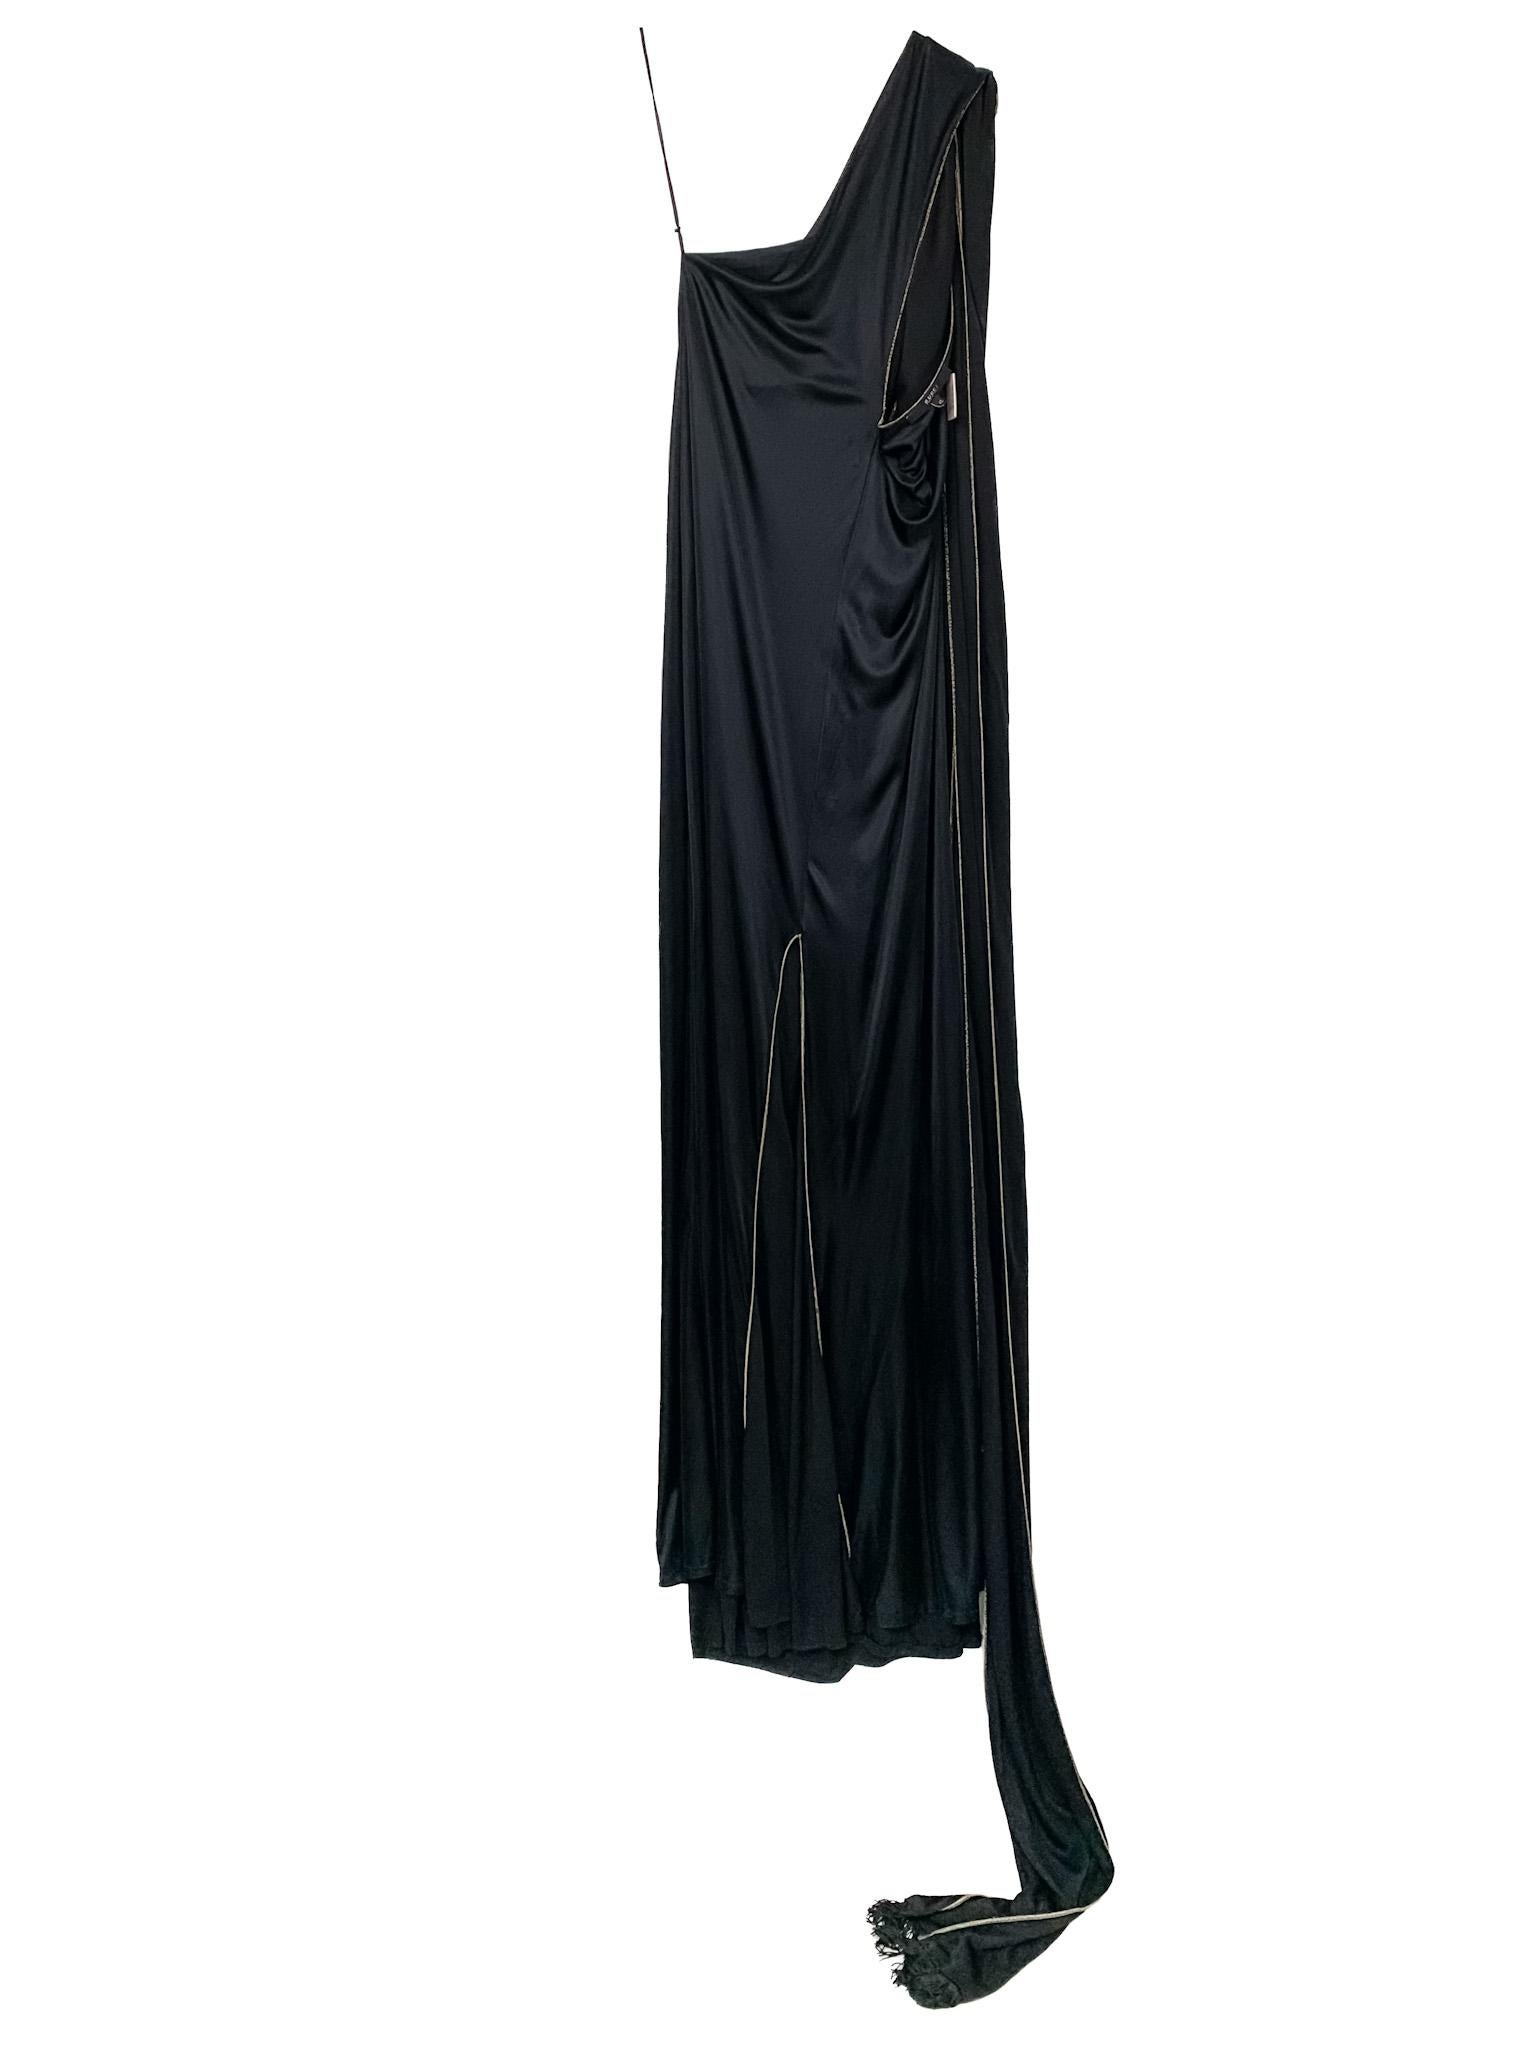 Gucci 2006 One-Shoulder Gown with Fringed Scarves/Train, Cutouts, Gold Topstitch 8